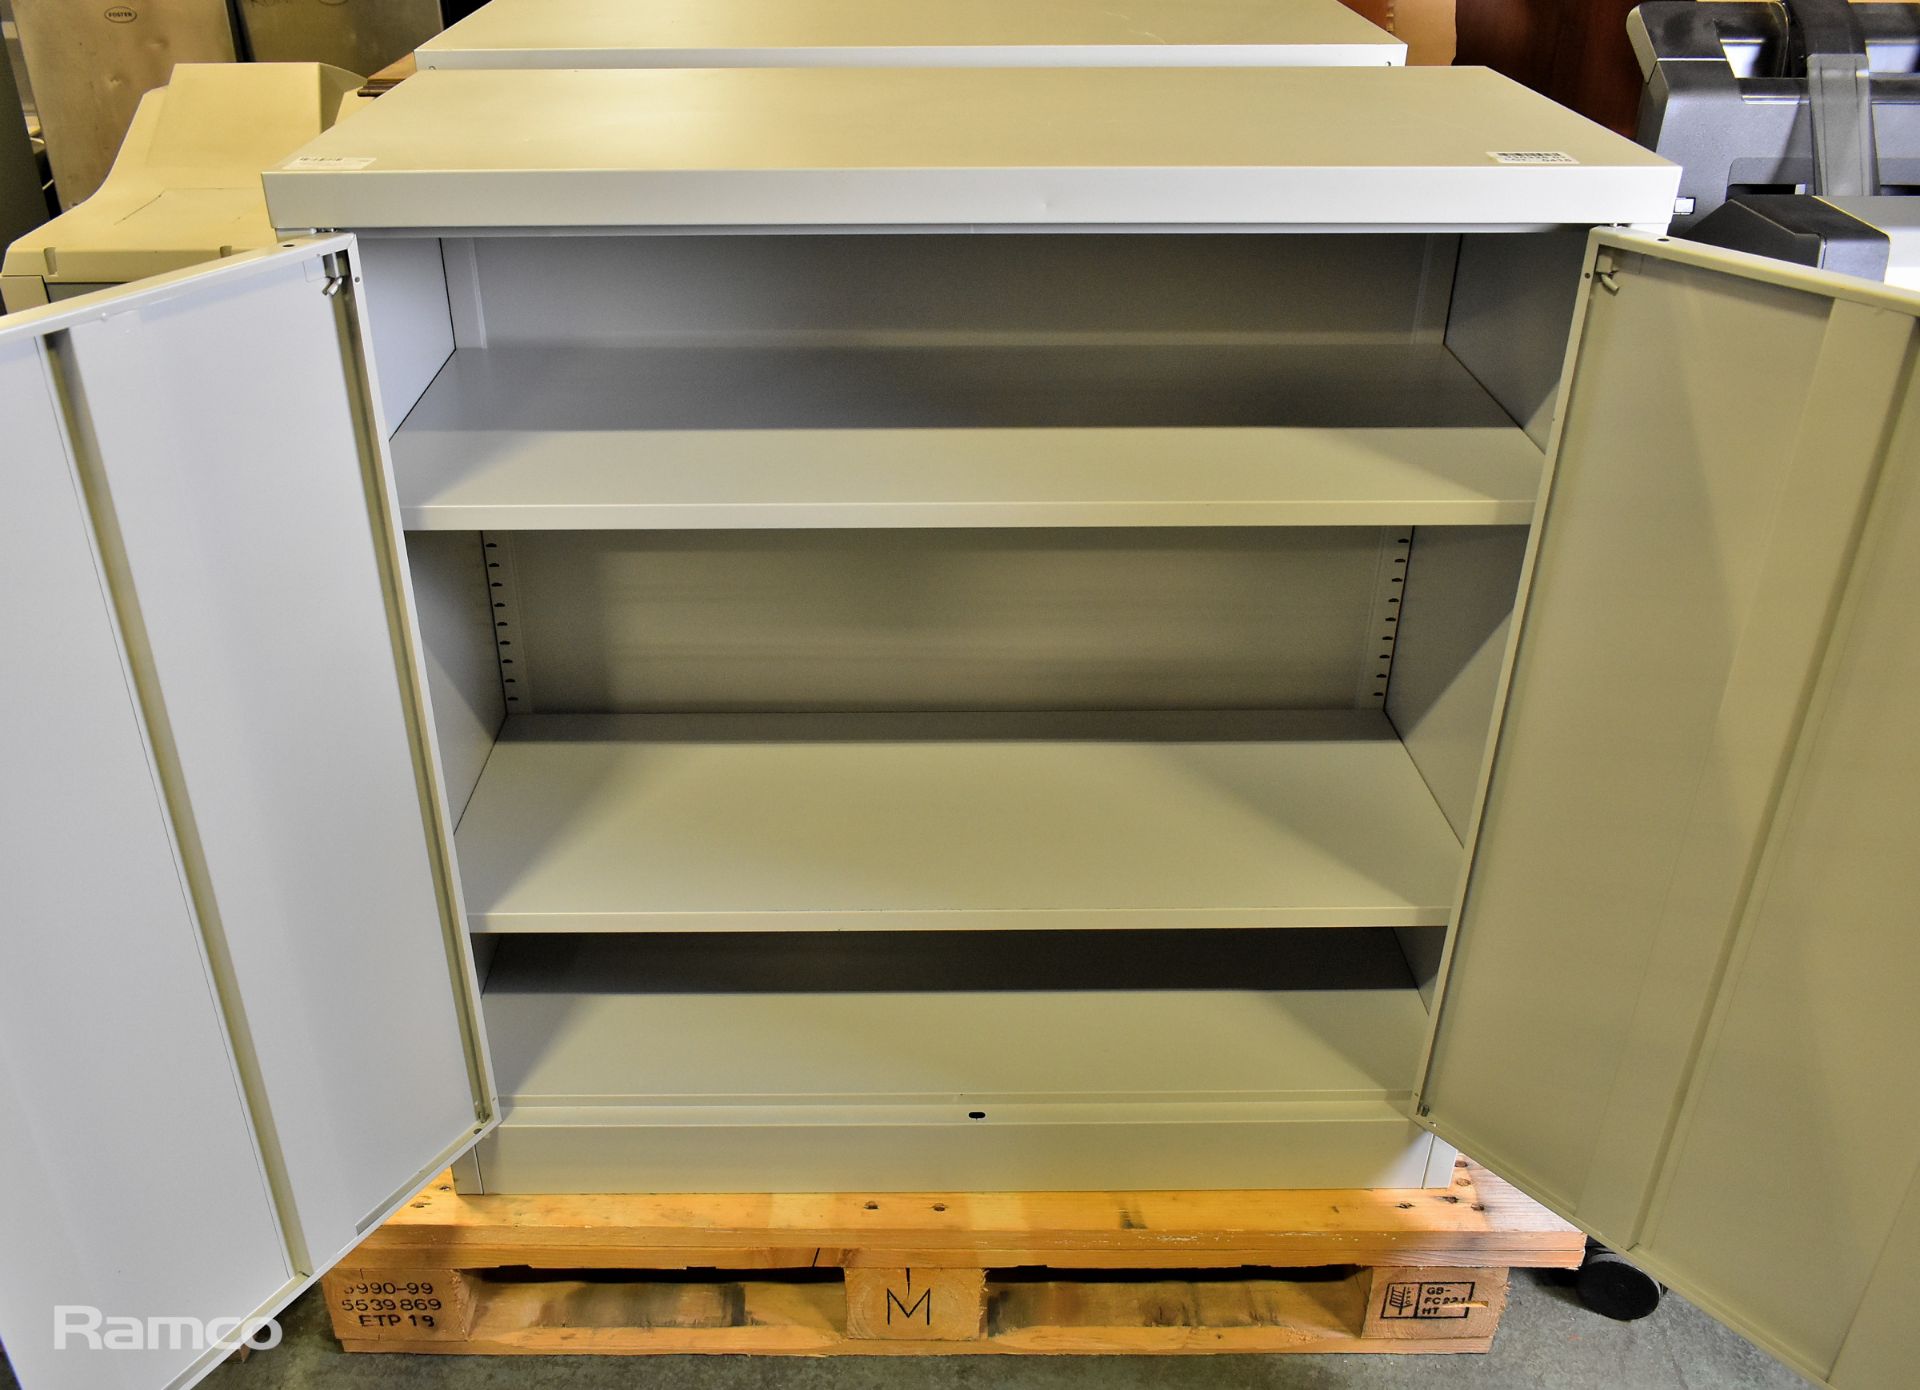 Metal cabinet with shelves and 2 lockable doors - 90 x 40 x 90cm - Image 3 of 3